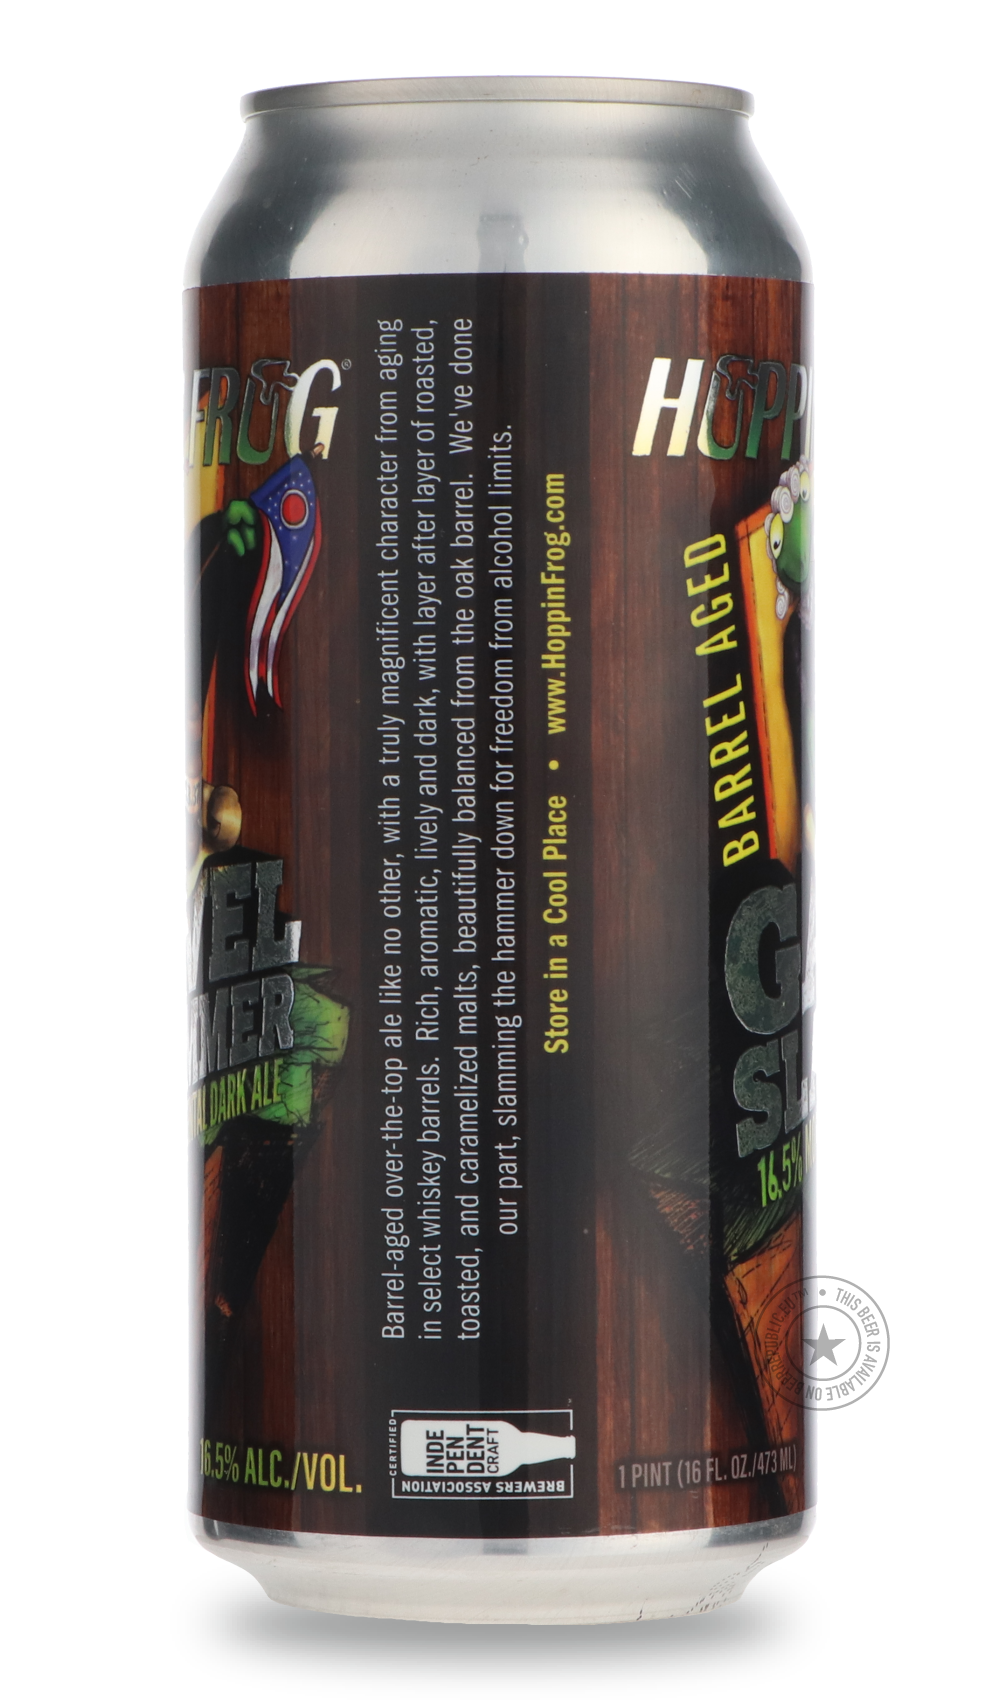 -Hoppin' Frog- Barrel Aged Gavel Slammer-Brown & Dark- Only @ Beer Republic - The best online beer store for American & Canadian craft beer - Buy beer online from the USA and Canada - Bier online kopen - Amerikaans bier kopen - Craft beer store - Craft beer kopen - Amerikanisch bier kaufen - Bier online kaufen - Acheter biere online - IPA - Stout - Porter - New England IPA - Hazy IPA - Imperial Stout - Barrel Aged - Barrel Aged Imperial Stout - Brown - Dark beer - Blond - Blonde - Pilsner - Lager - Wheat - 